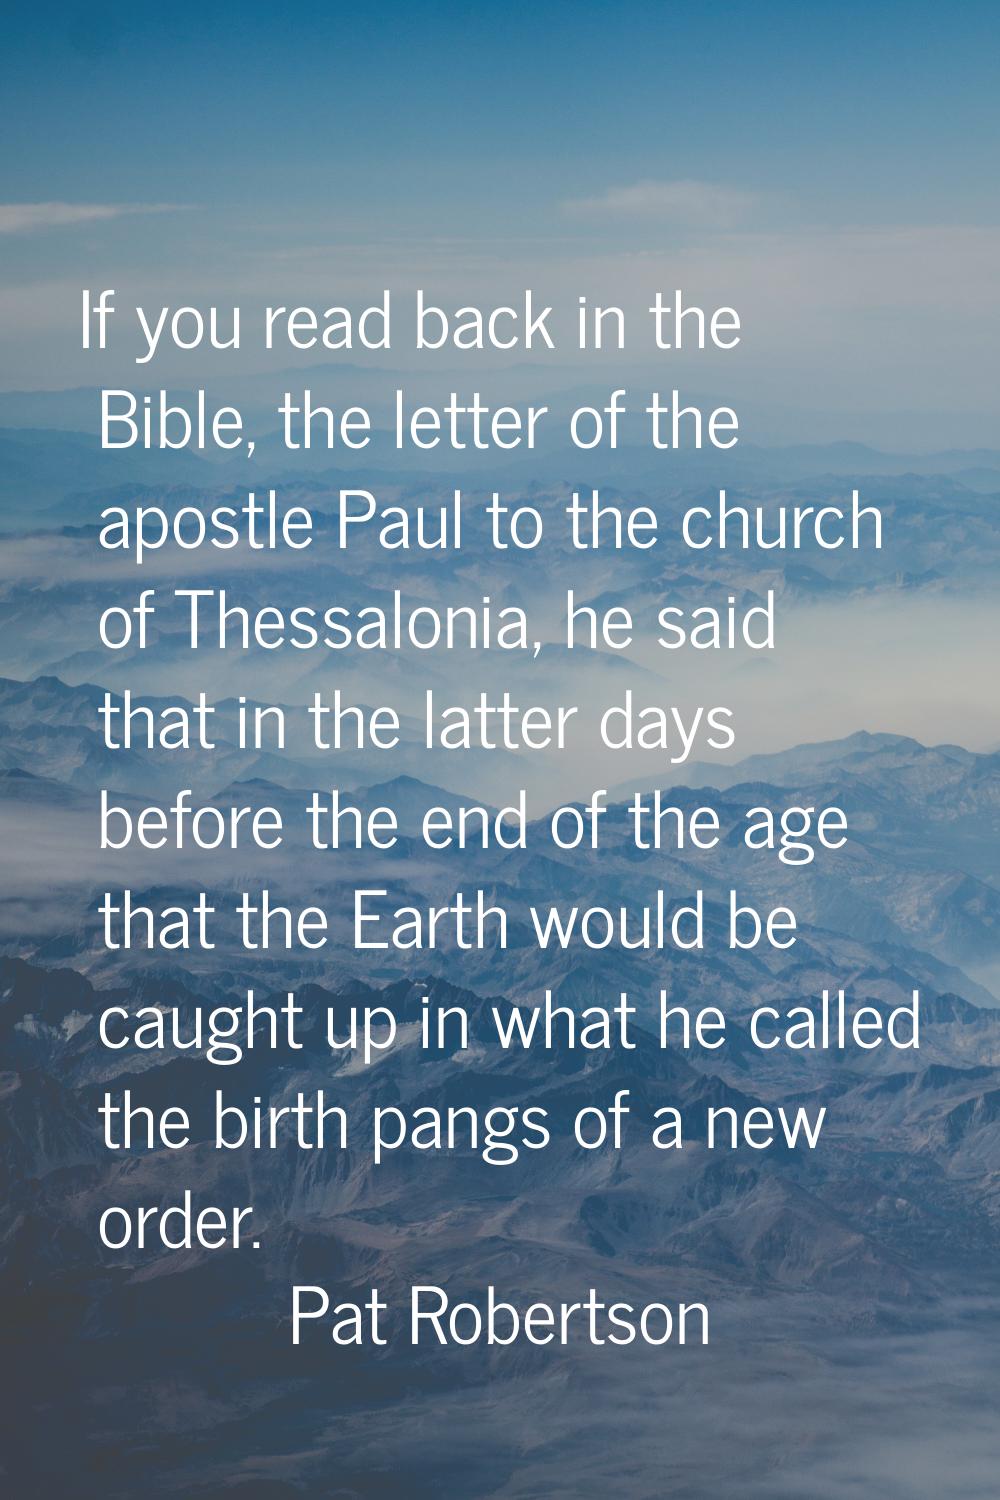 If you read back in the Bible, the letter of the apostle Paul to the church of Thessalonia, he said